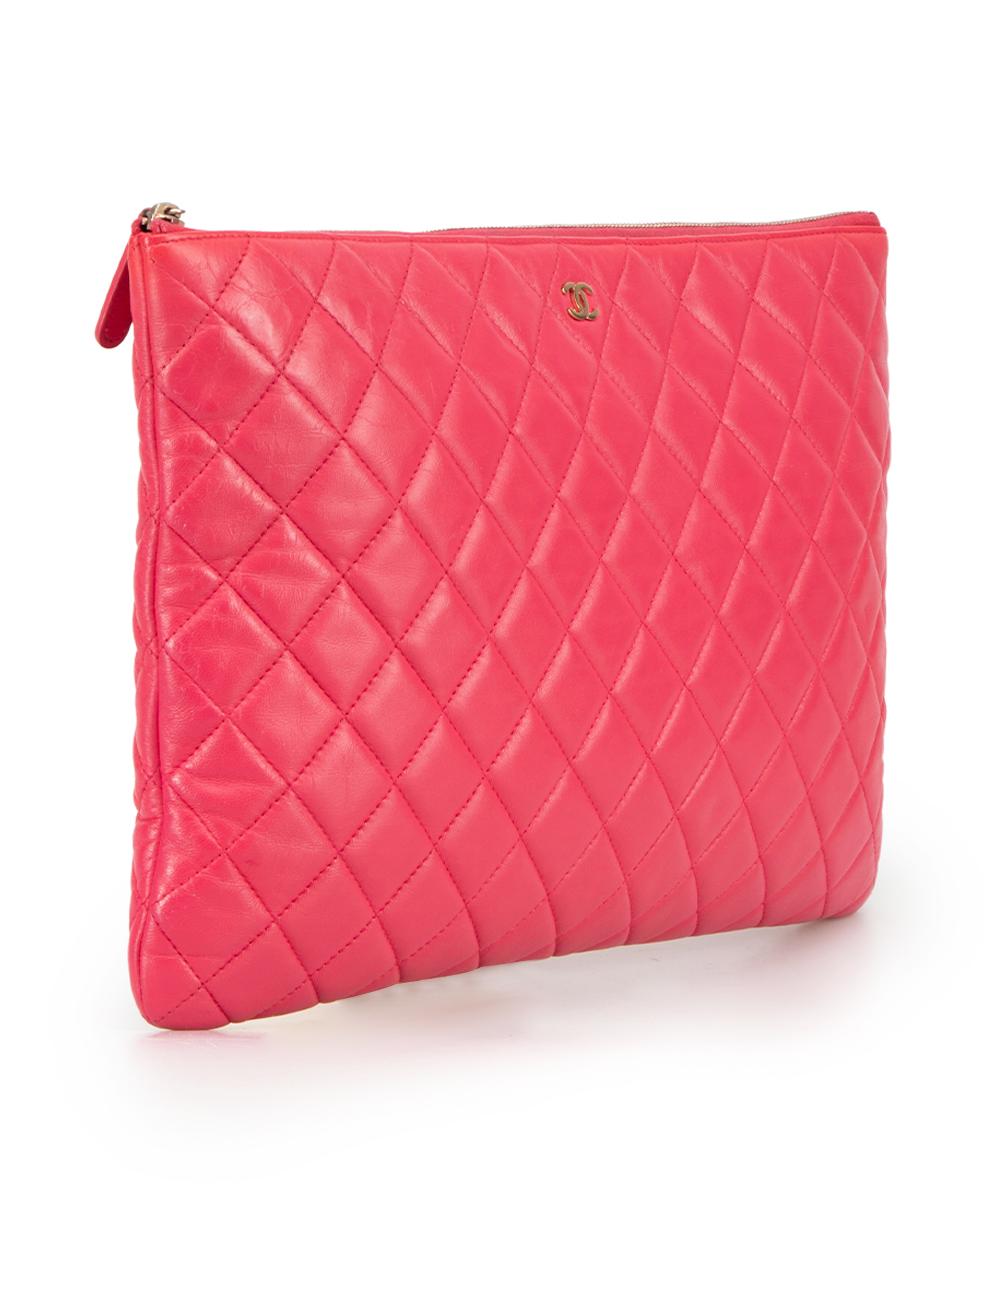 CONDITION is Very good. Minimal wear to clutch is evident. Minimal wear to the front-right where the paint has begun to crack and the top zip hardware shows signs of tarnishing on this used Chanel designer resale item.
  
Details
Pink
Leather
Medium